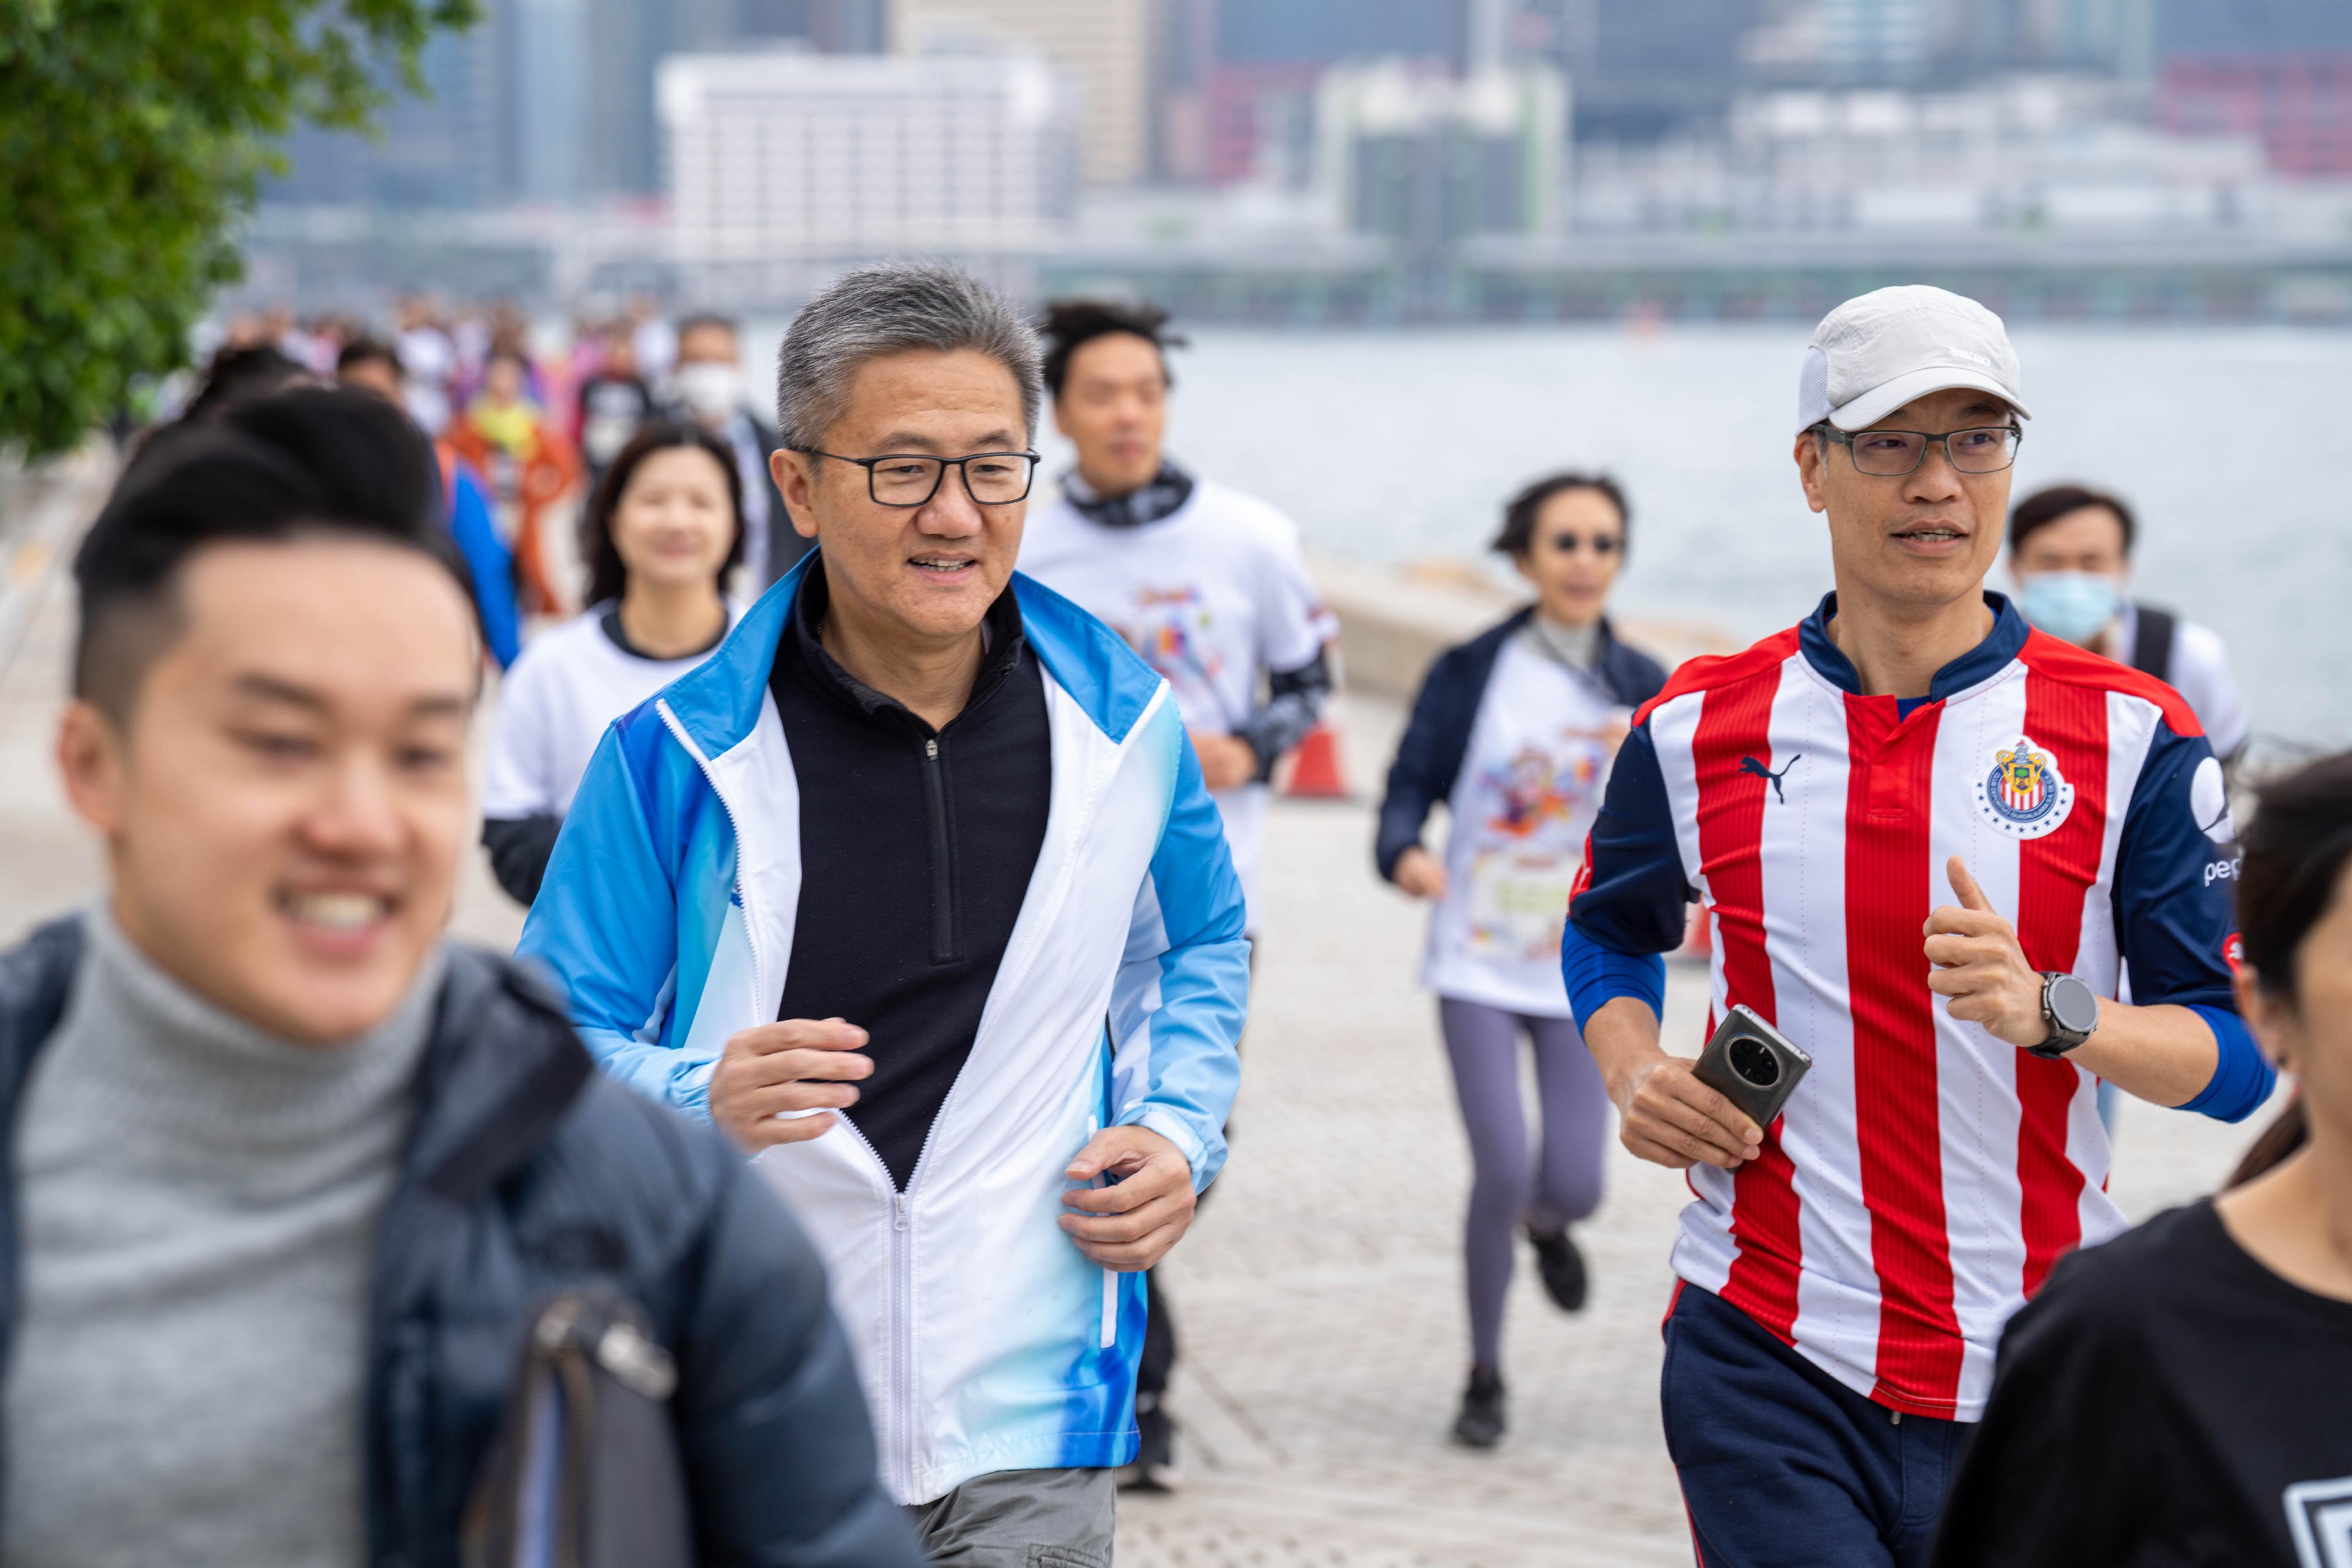 The Anti-Deception Coordination Centre of the Hong Kong Police Force organises the "West Kowloon CHILL RUN Winter Market cum Anti-Scam Charity Run 2023" at the West Kowloon Cultural District today (December 17). Photo shows the Commissioner of Police, Mr Siu Chak-yee (left), and the Director of Crime and Security, Mr Yip Wan-lung (right), participating in the Anti-Scam Charity Run.